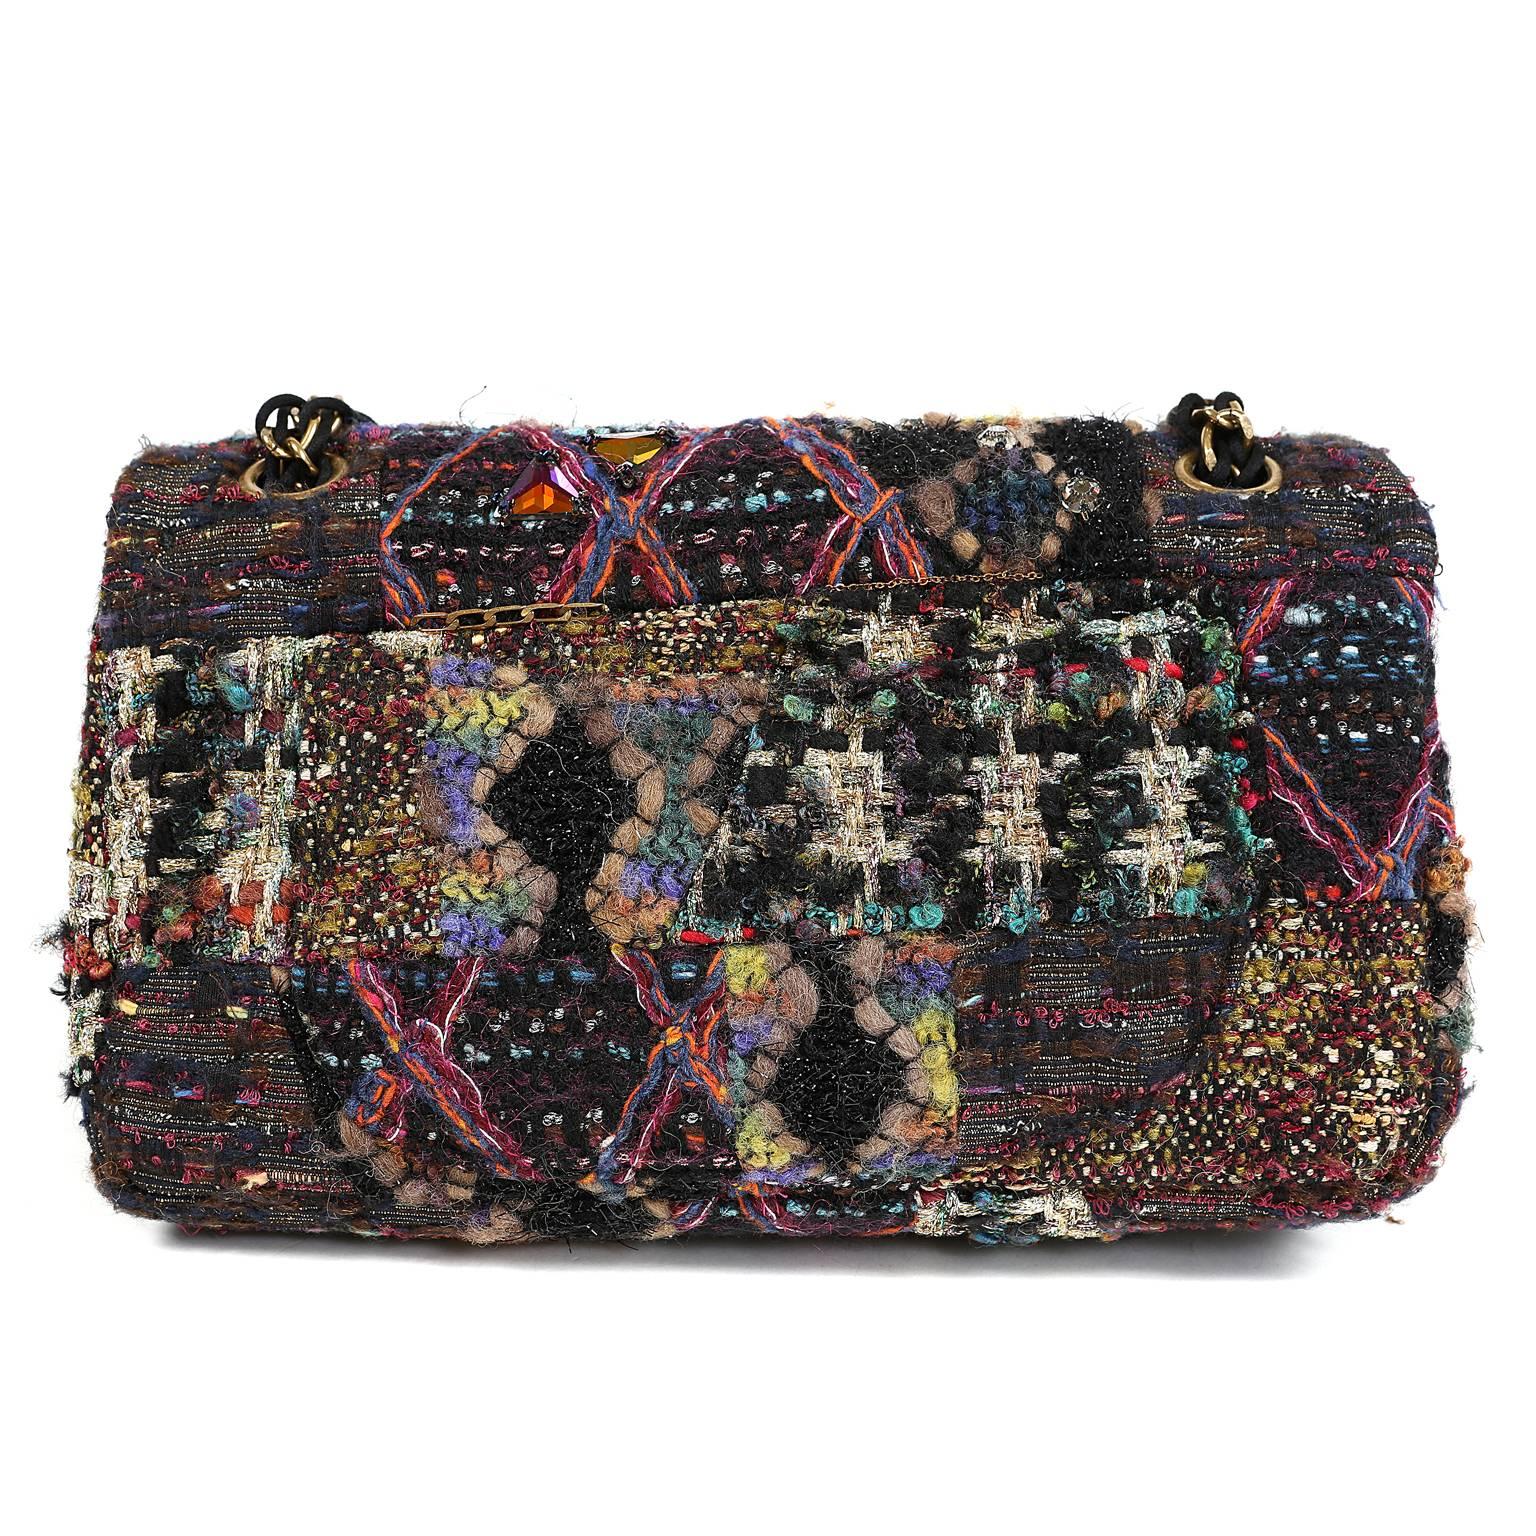 Chanel Jeweled Tweed Runway Flap Bag- PRISTINE, unworn condition
 Breathtakingly designed in a melange of texture, color and applique, this rare piece is a multimedia art form.   
 
Multi-hued assortment of tweed and boucle wool blend fabrics are